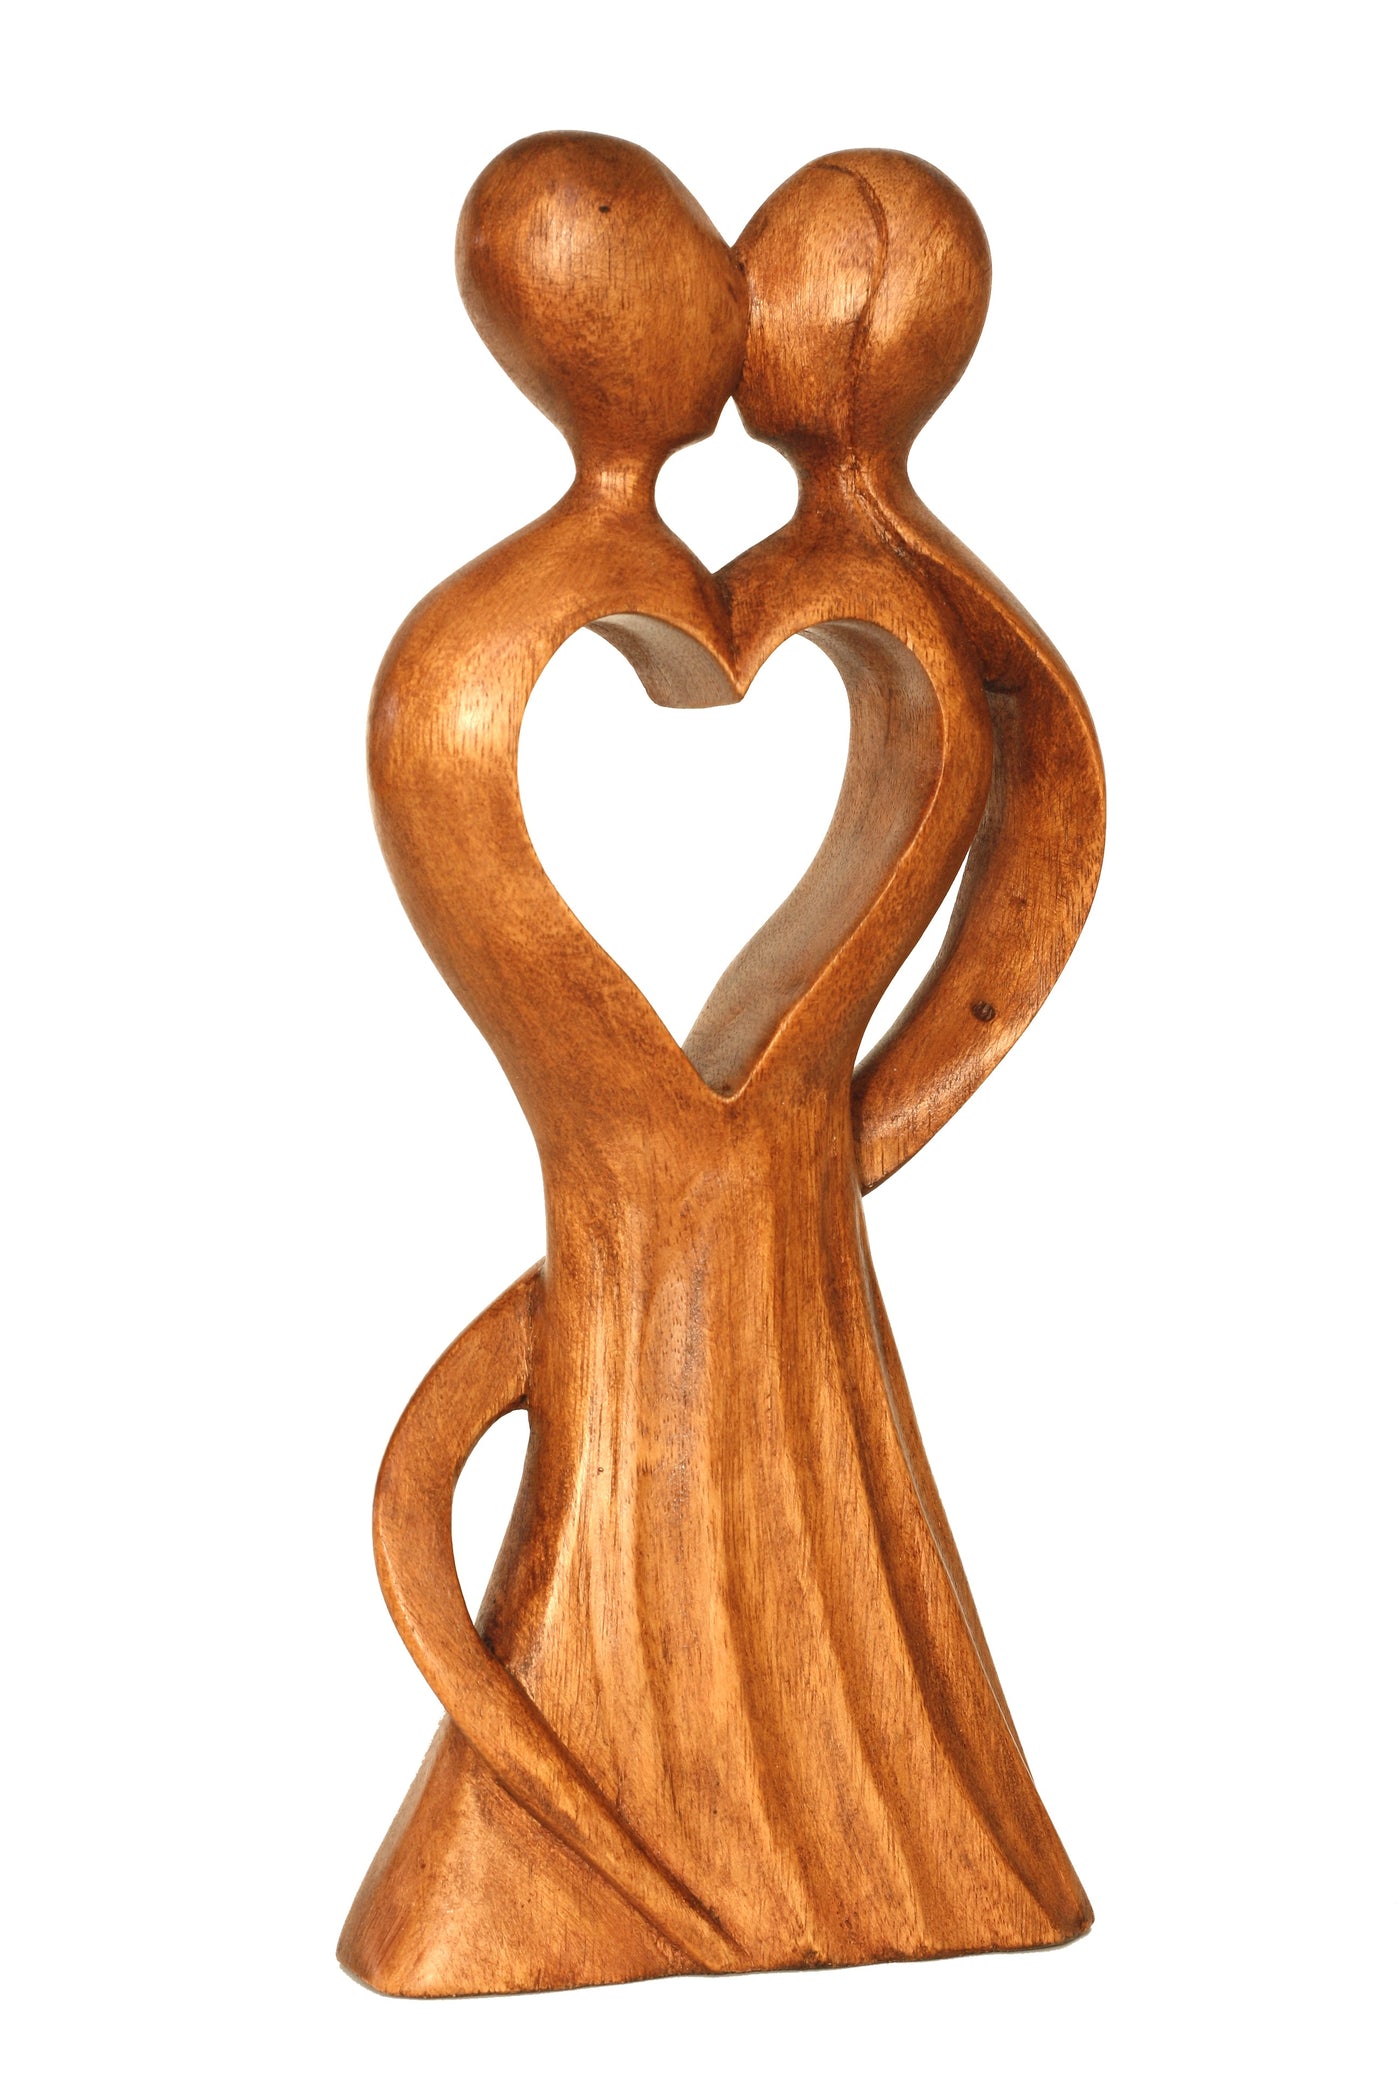 12" Wooden Handmade Abstract Sculpture Statue Handcrafted "Love of My Life" Gift Art Home Decor Figurine Accent Artwork Hand Carved